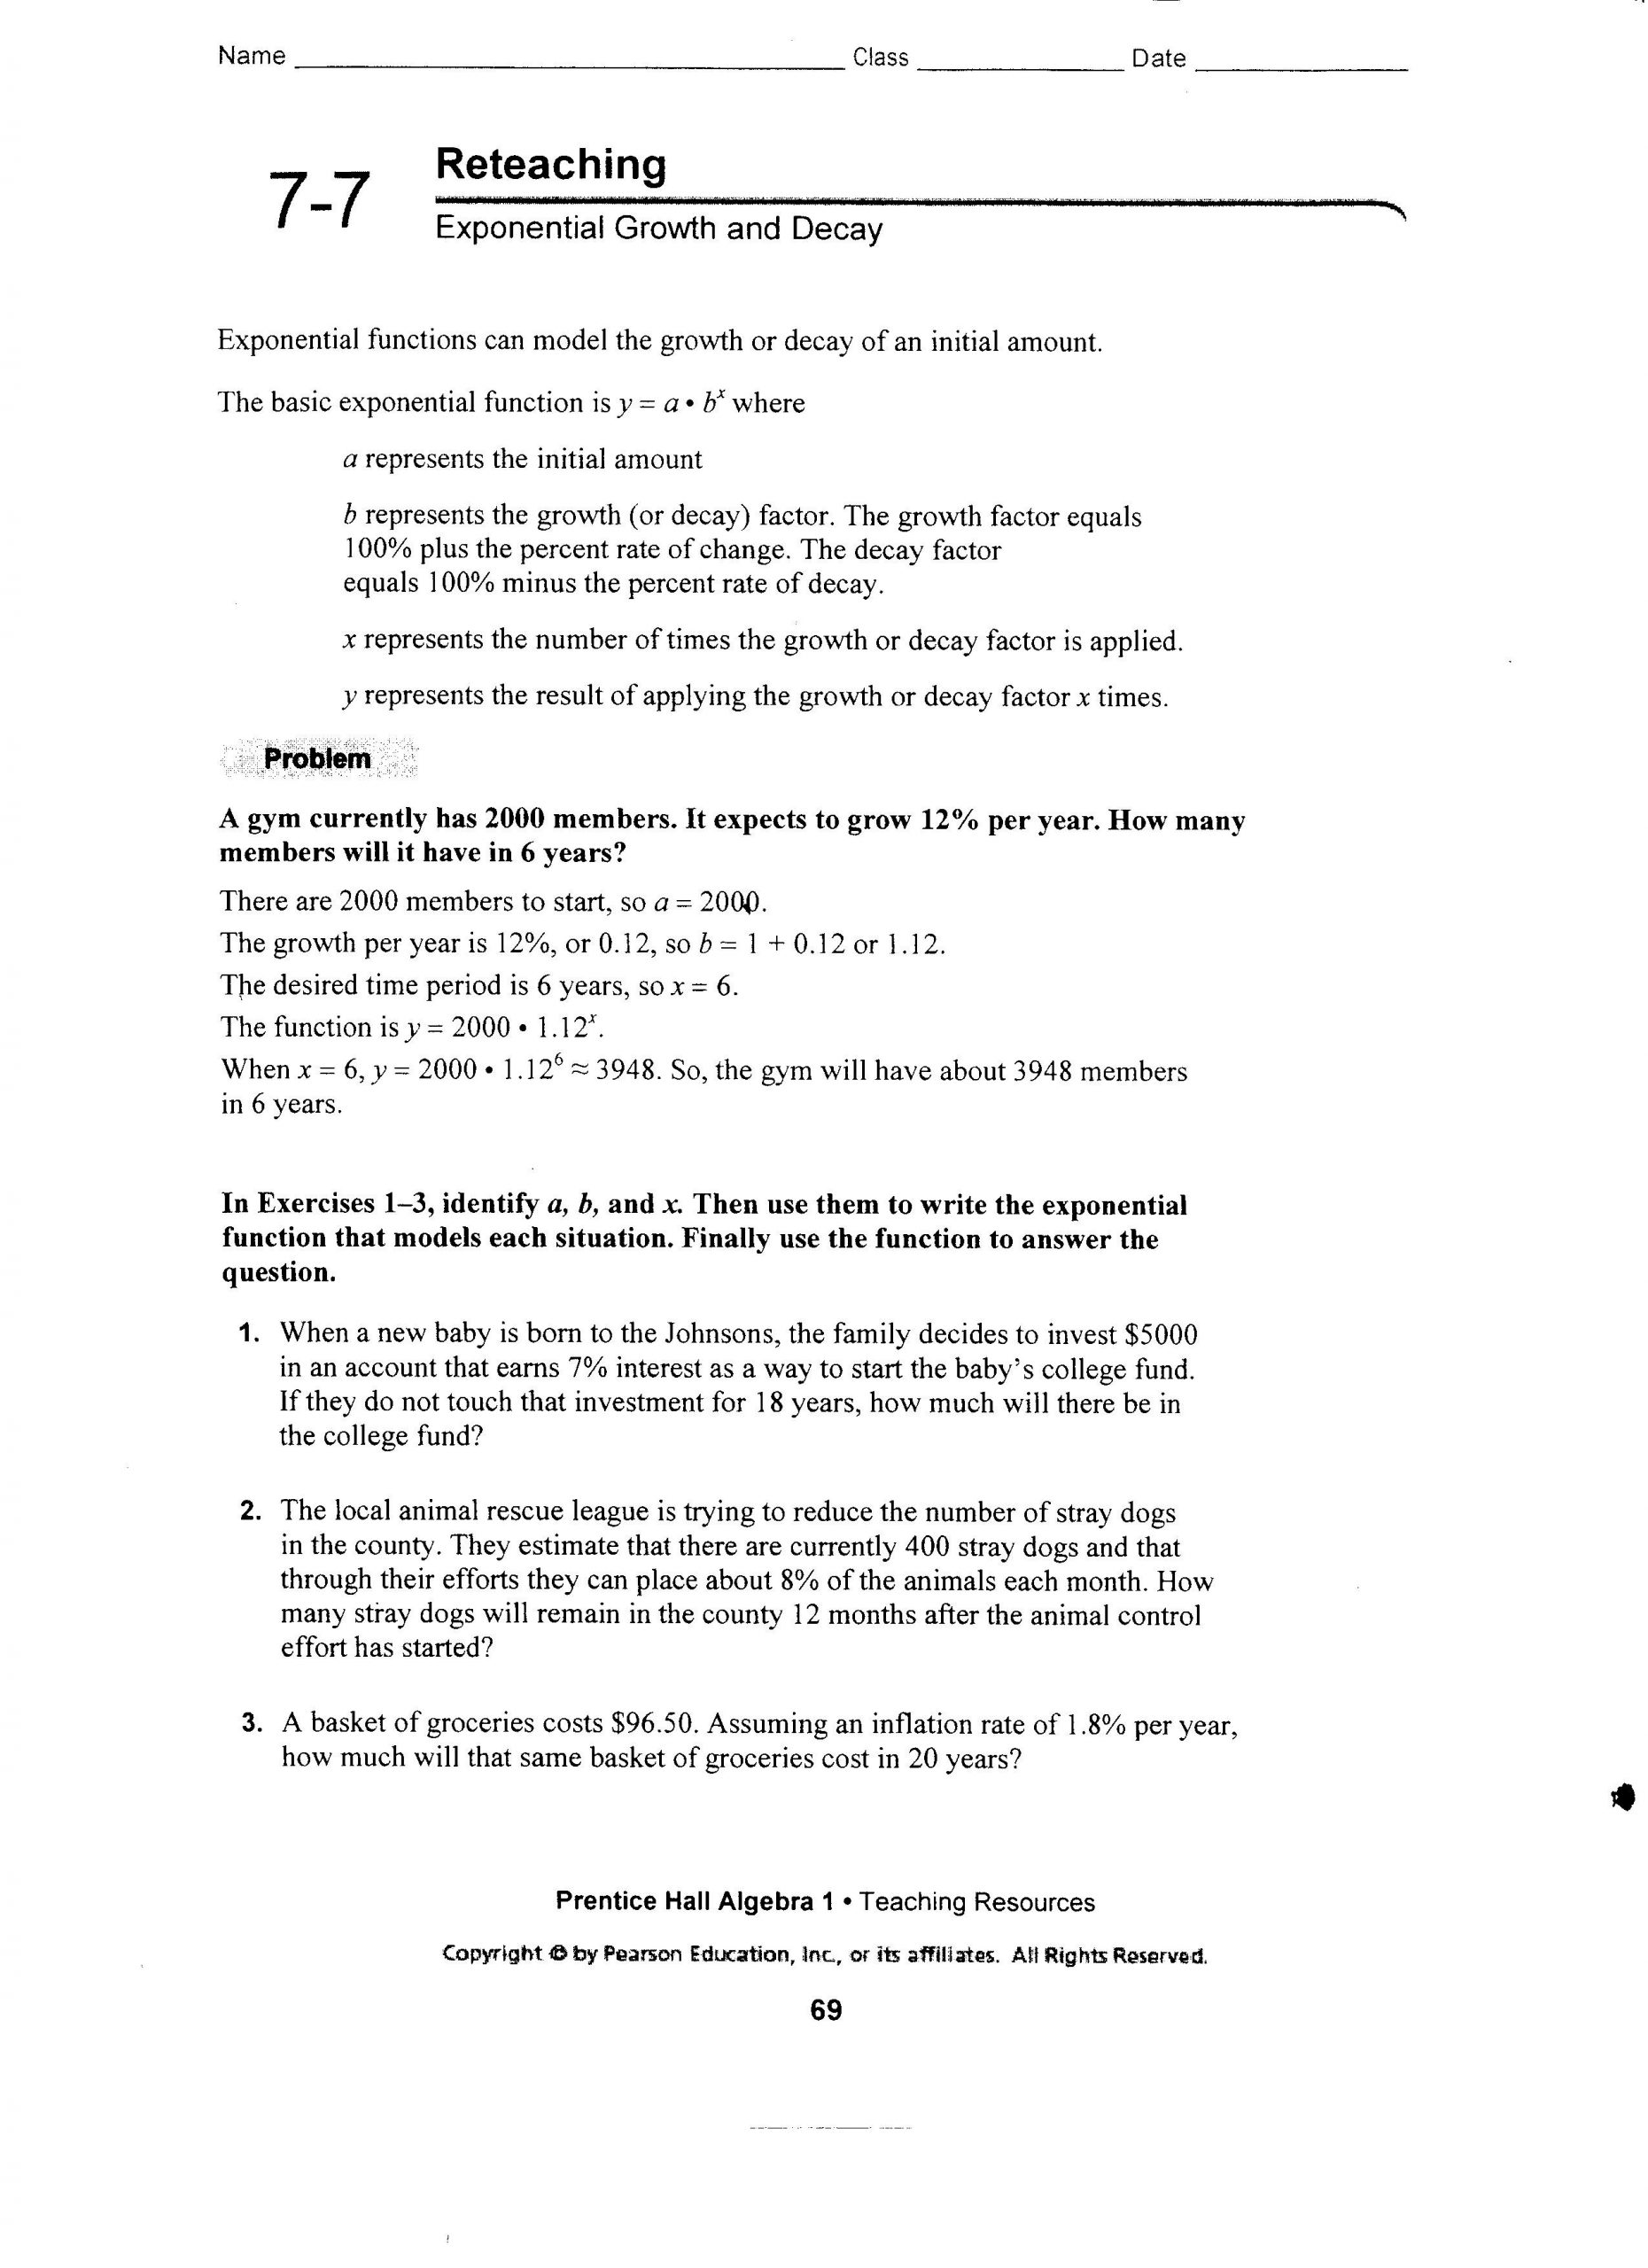 Growth and Decay Worksheet Modeling Exponential Growth and Decay Worksheet